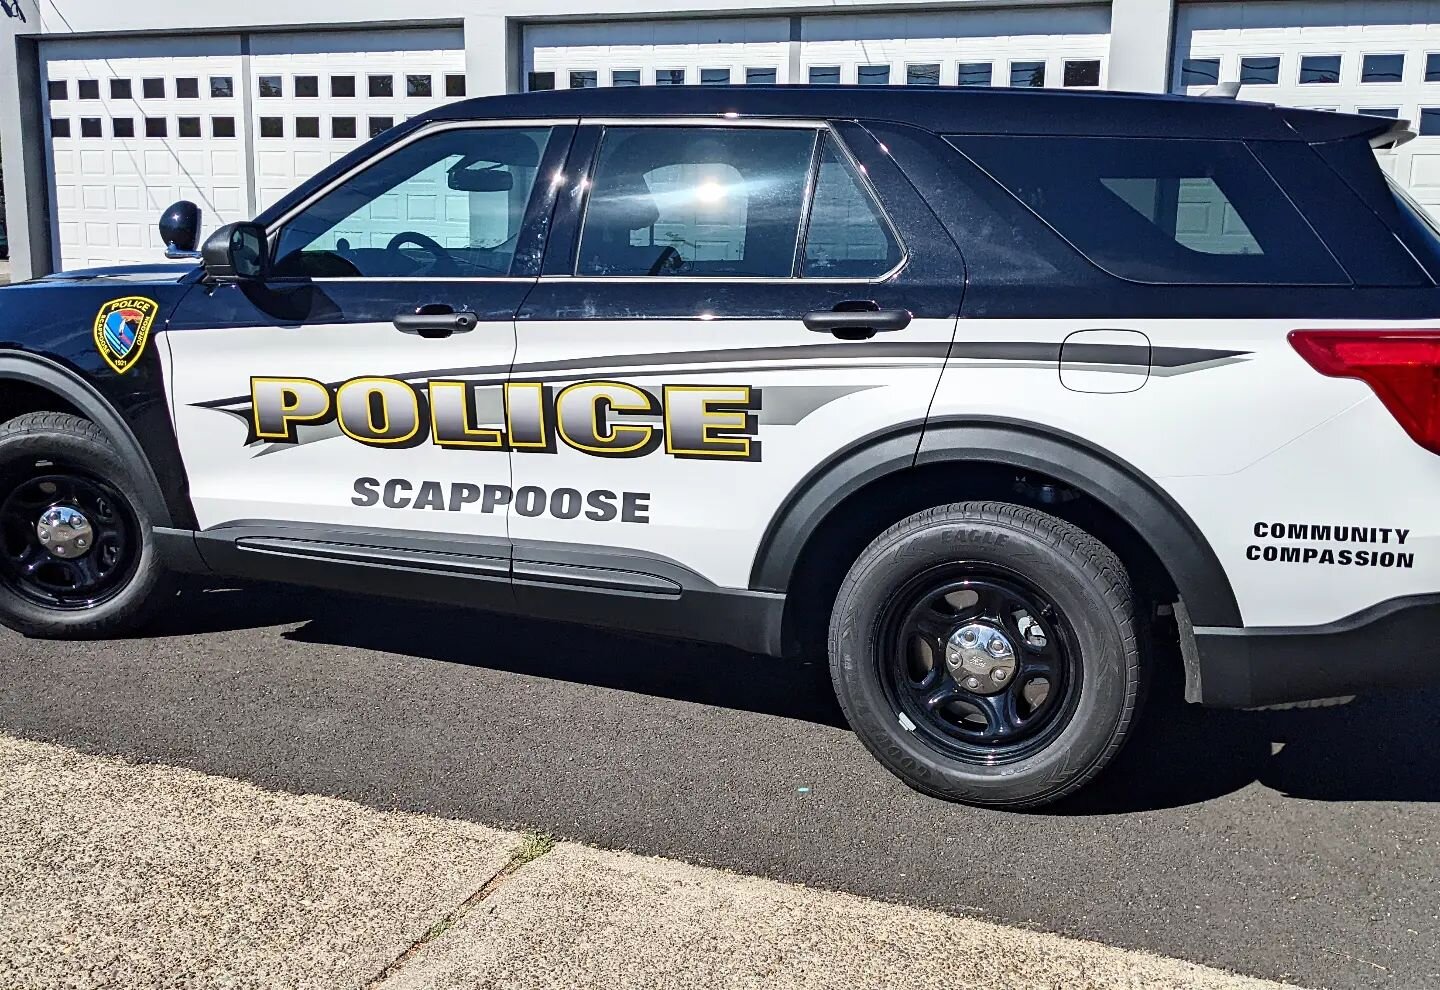 Design, print, install by The Sign Co team. New graphics package for Scappoose PD.